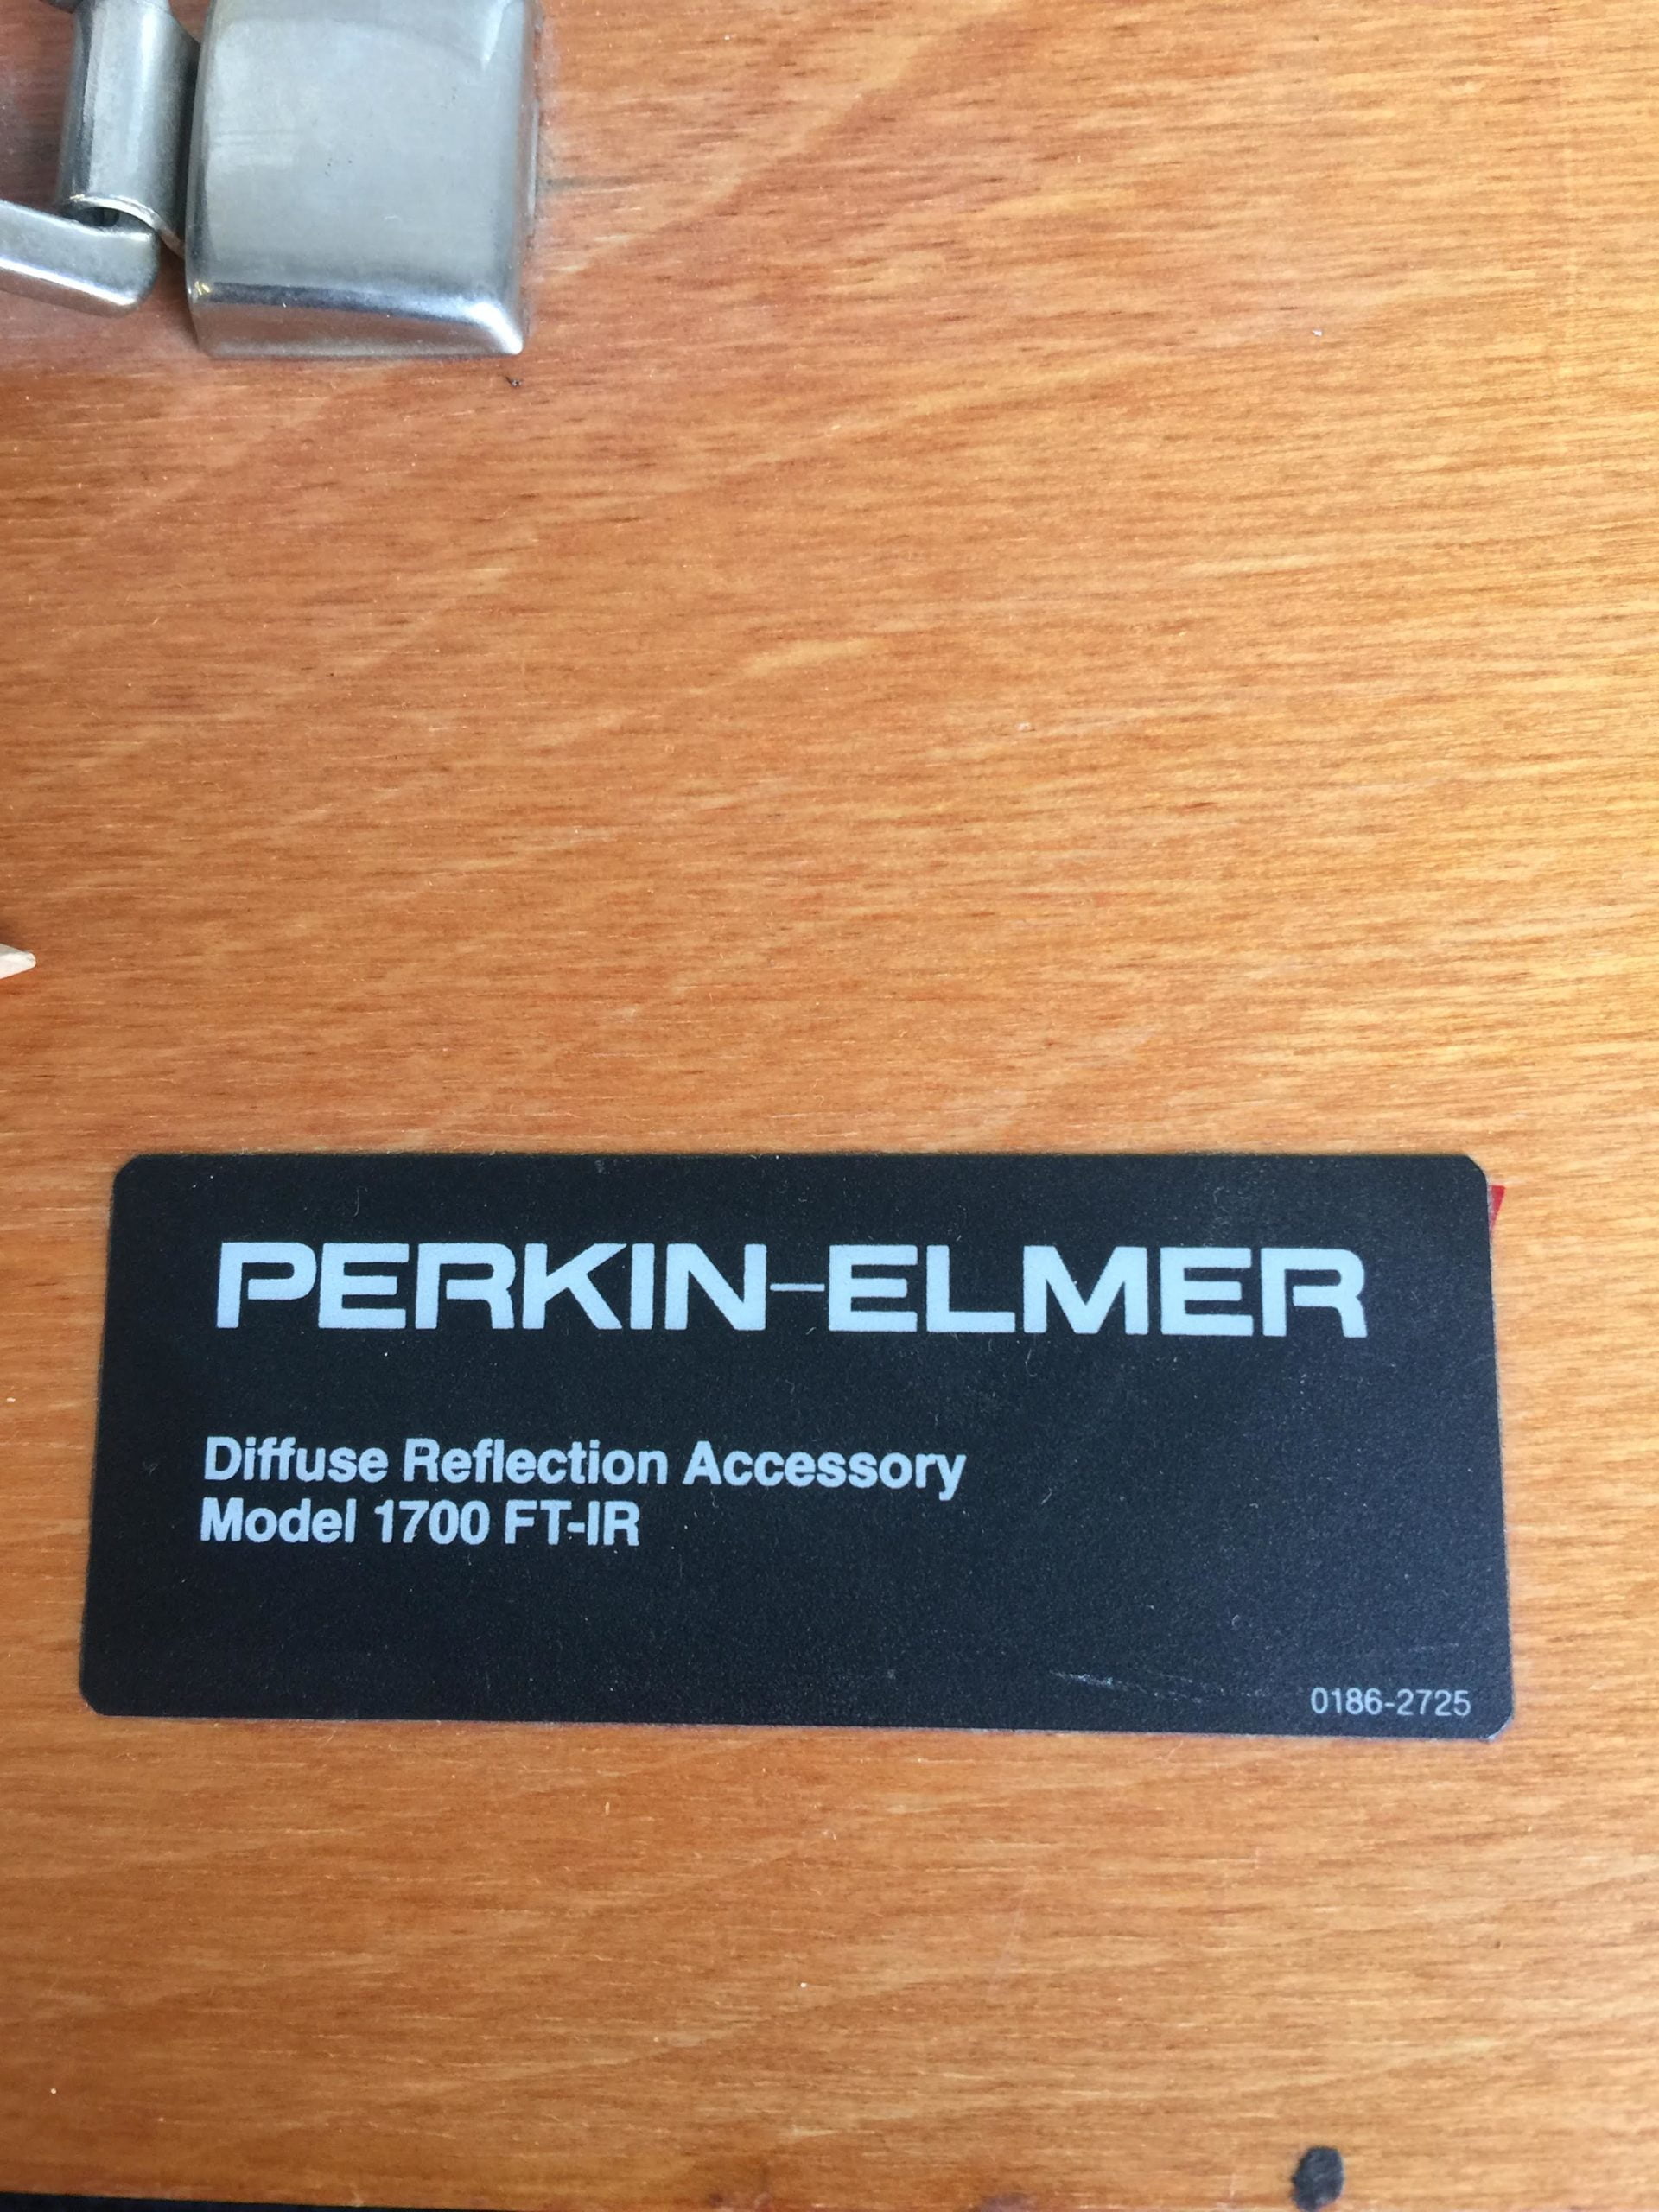 perkin elmer diffuse reflection accessory for model 1700 ft-ir spectrophotometer